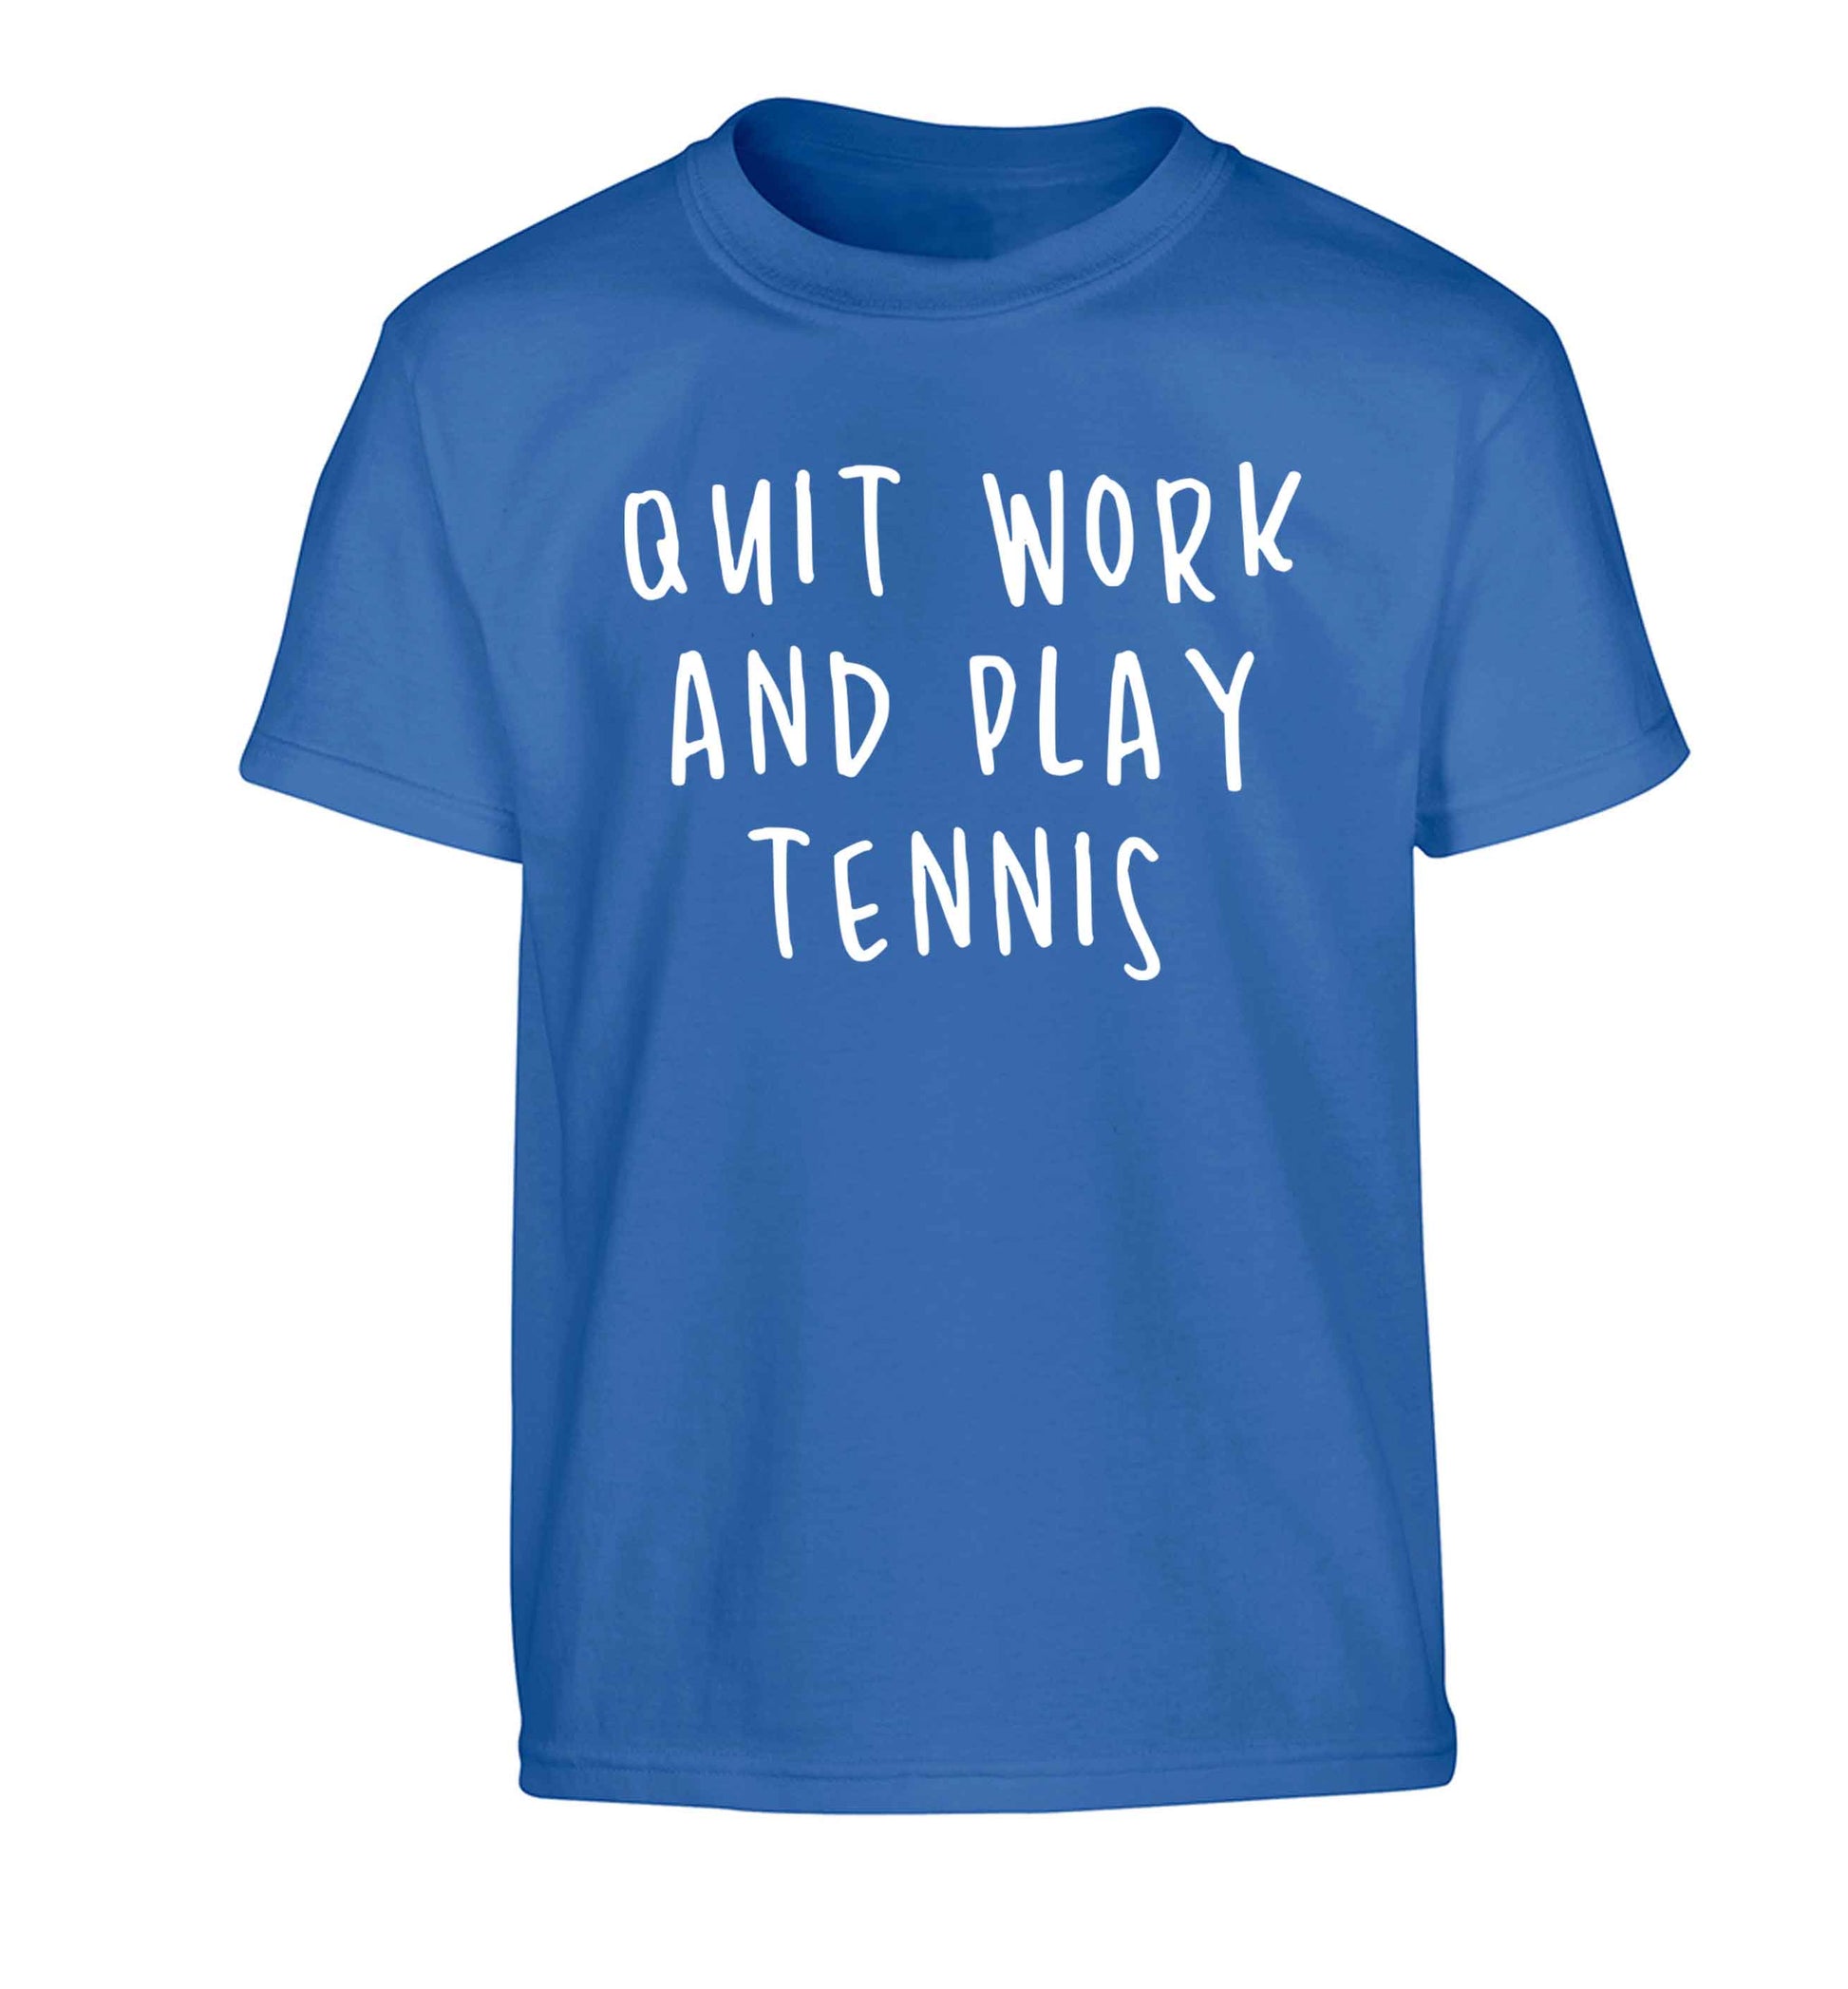 Quit work and play tennis Children's blue Tshirt 12-13 Years